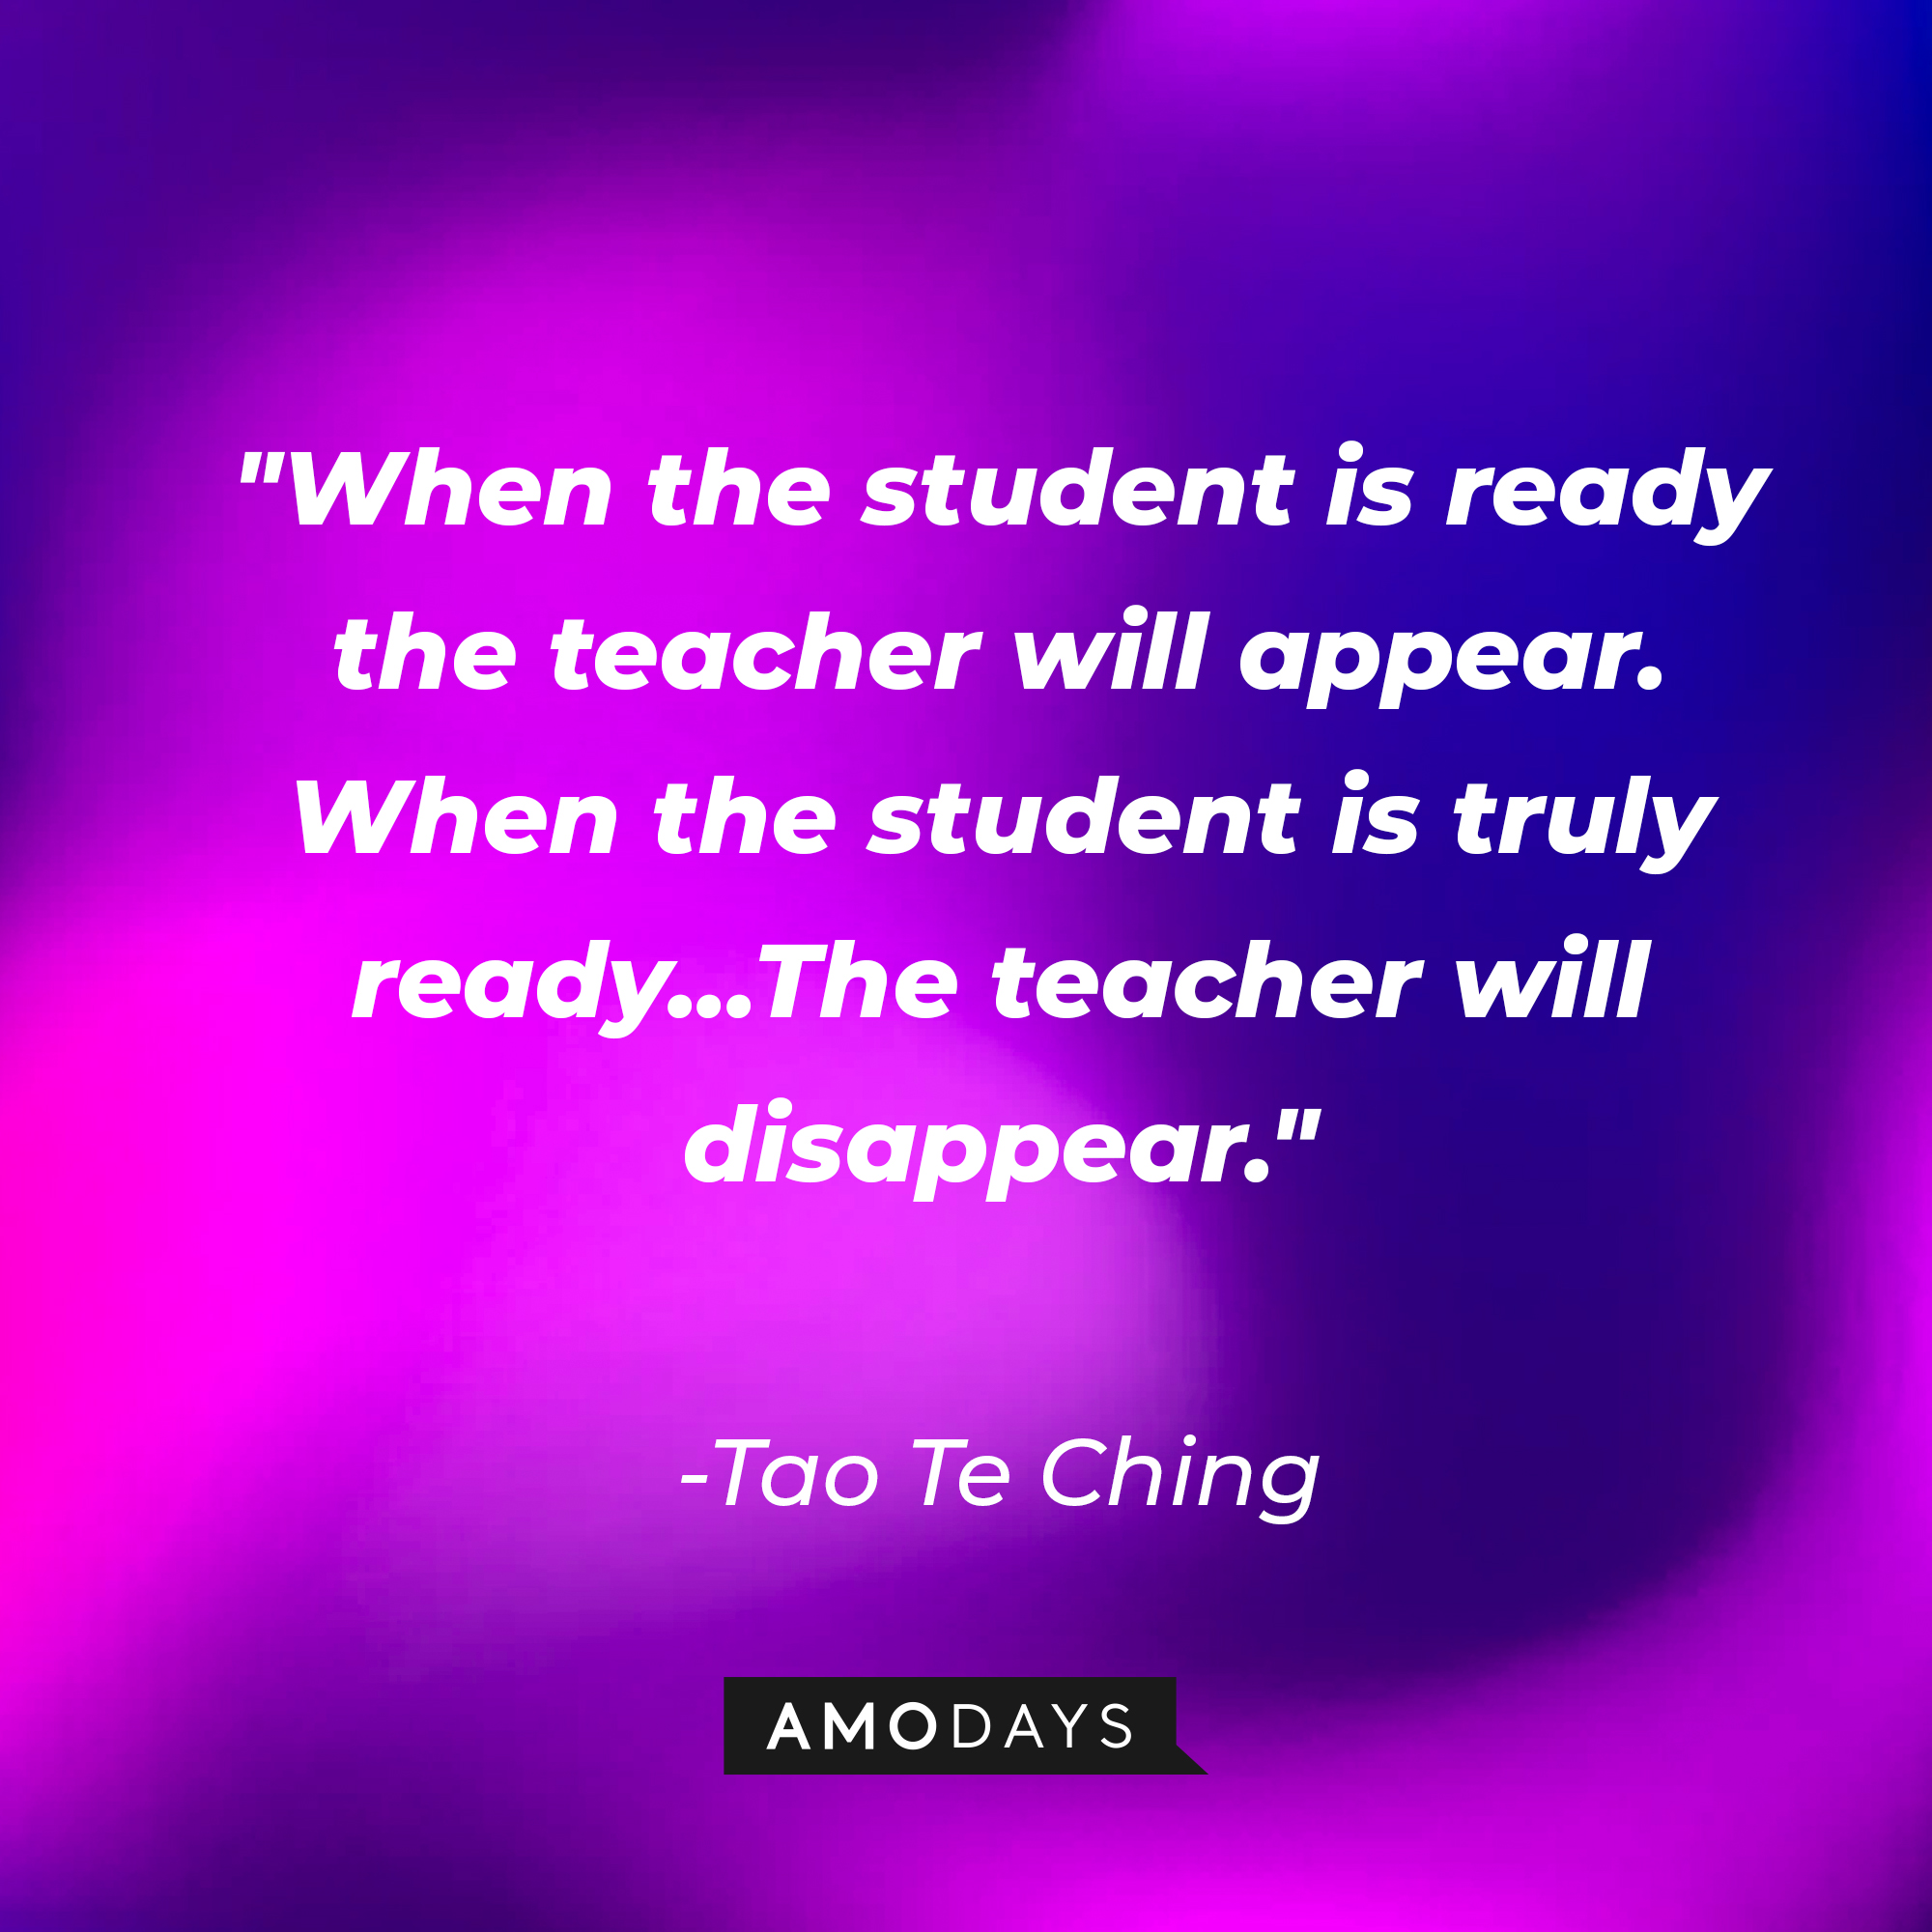 Tao Te Ching's quote: "When the student is ready the teacher will appear. When the student is truly ready... The teacher will disappear." | Image: AmoDays